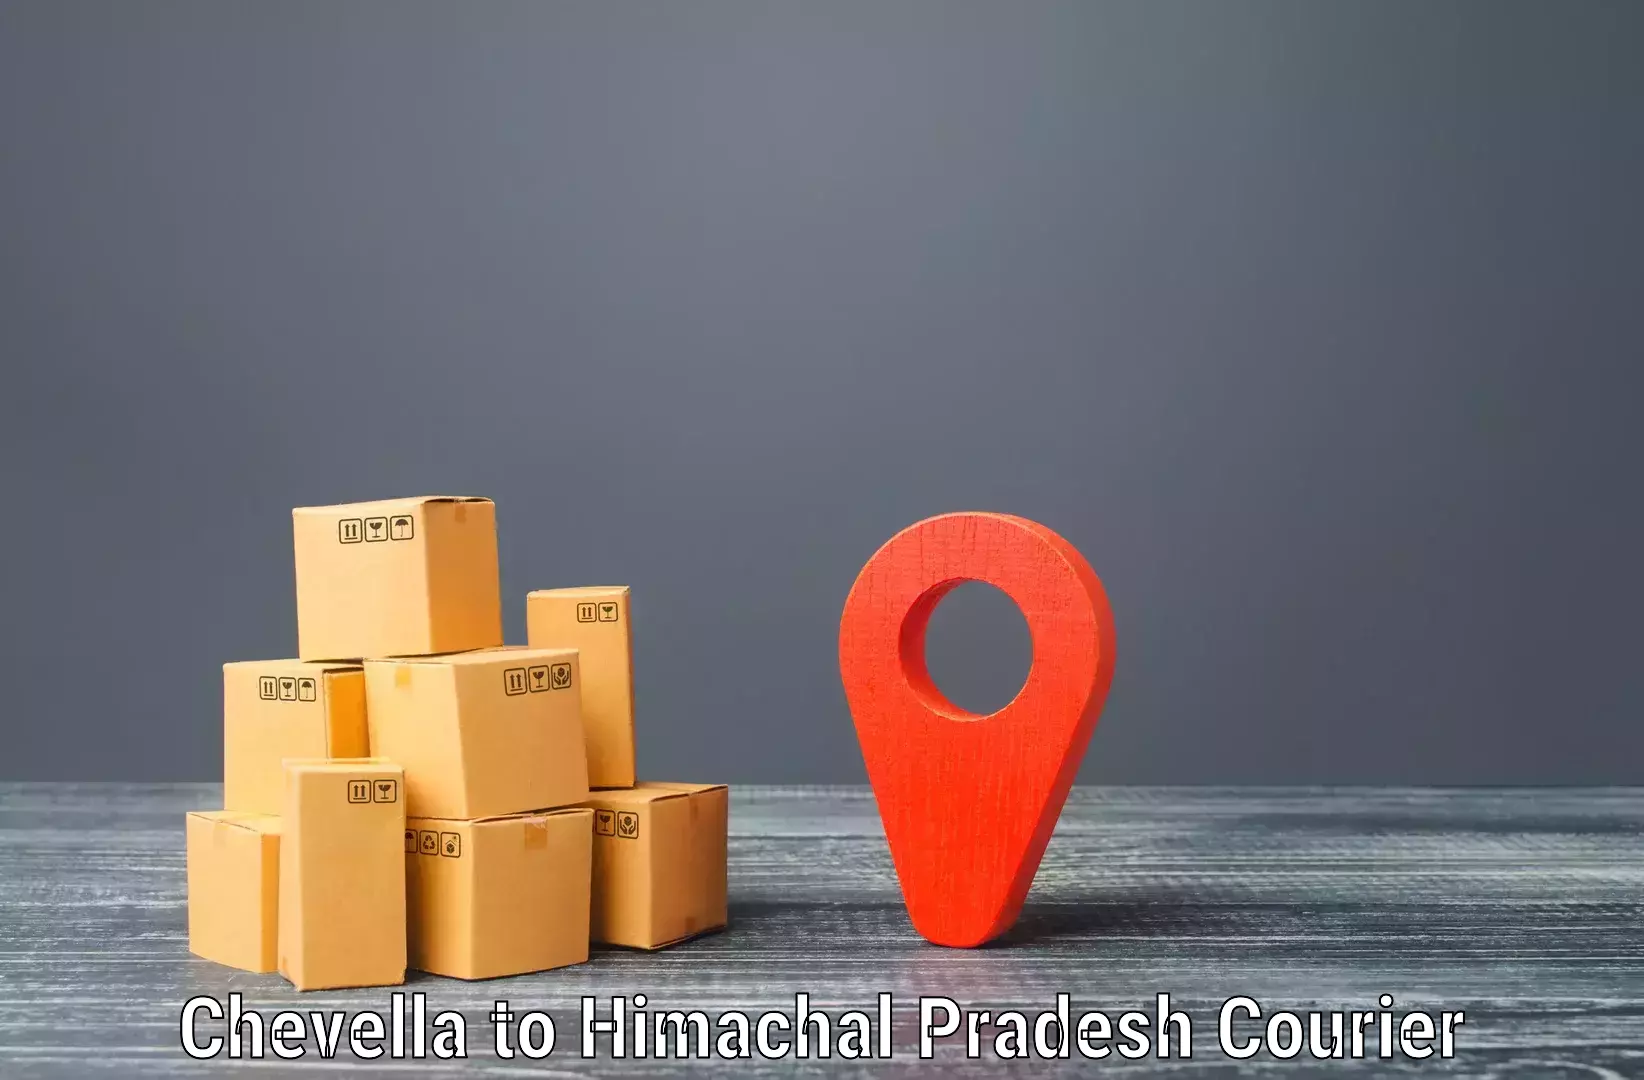 Small parcel delivery Chevella to Dharamshala